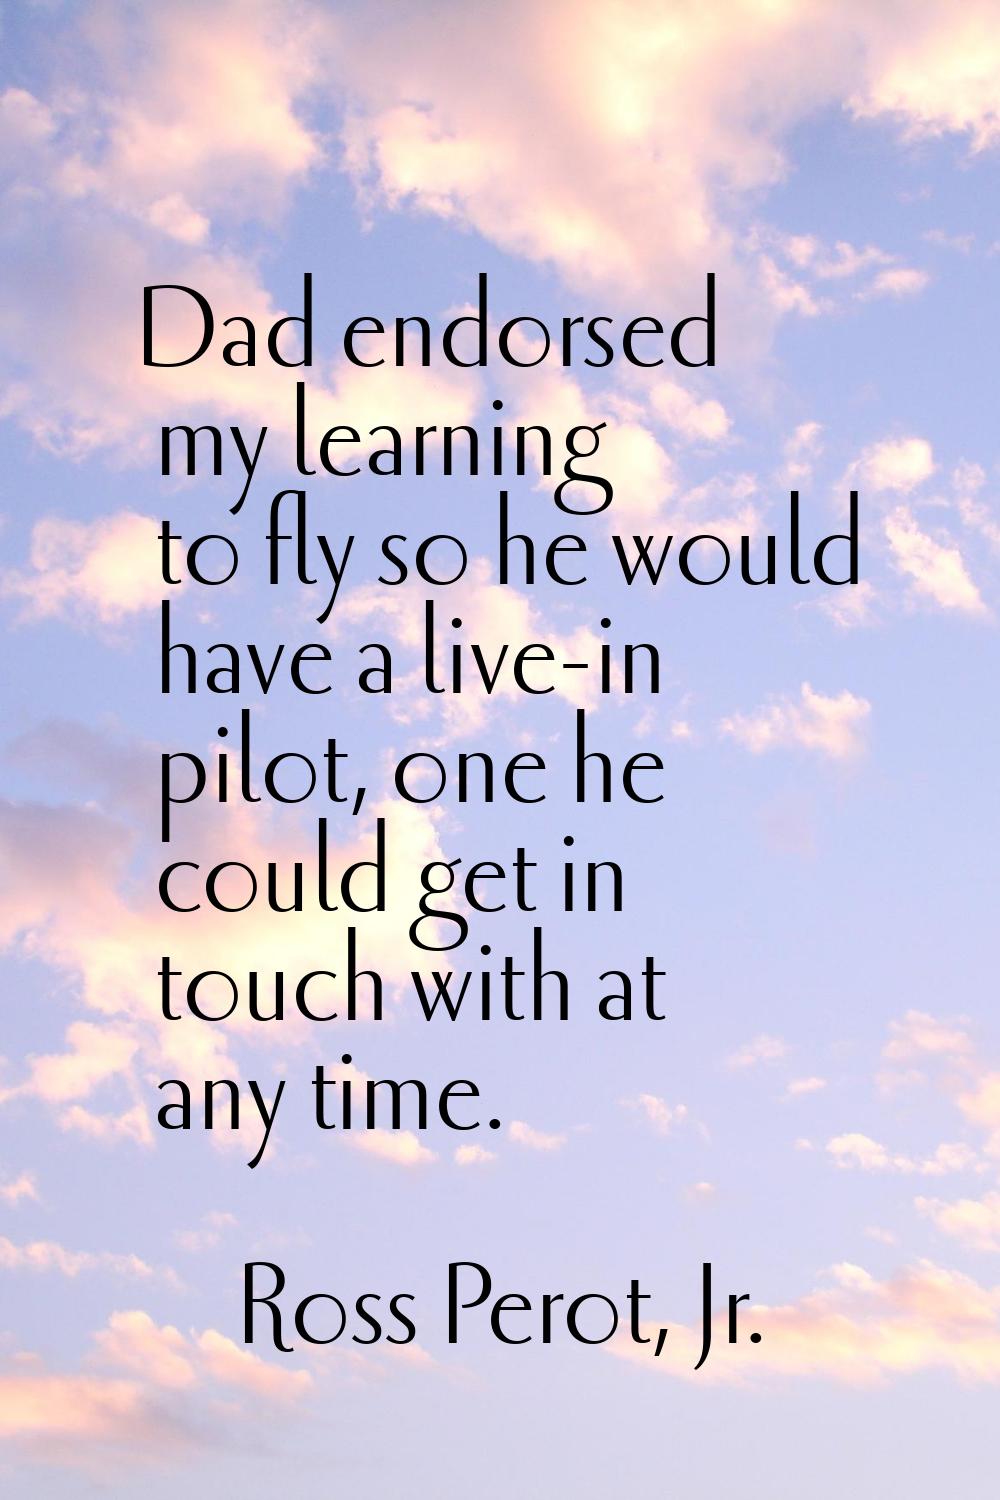 Dad endorsed my learning to fly so he would have a live-in pilot, one he could get in touch with at